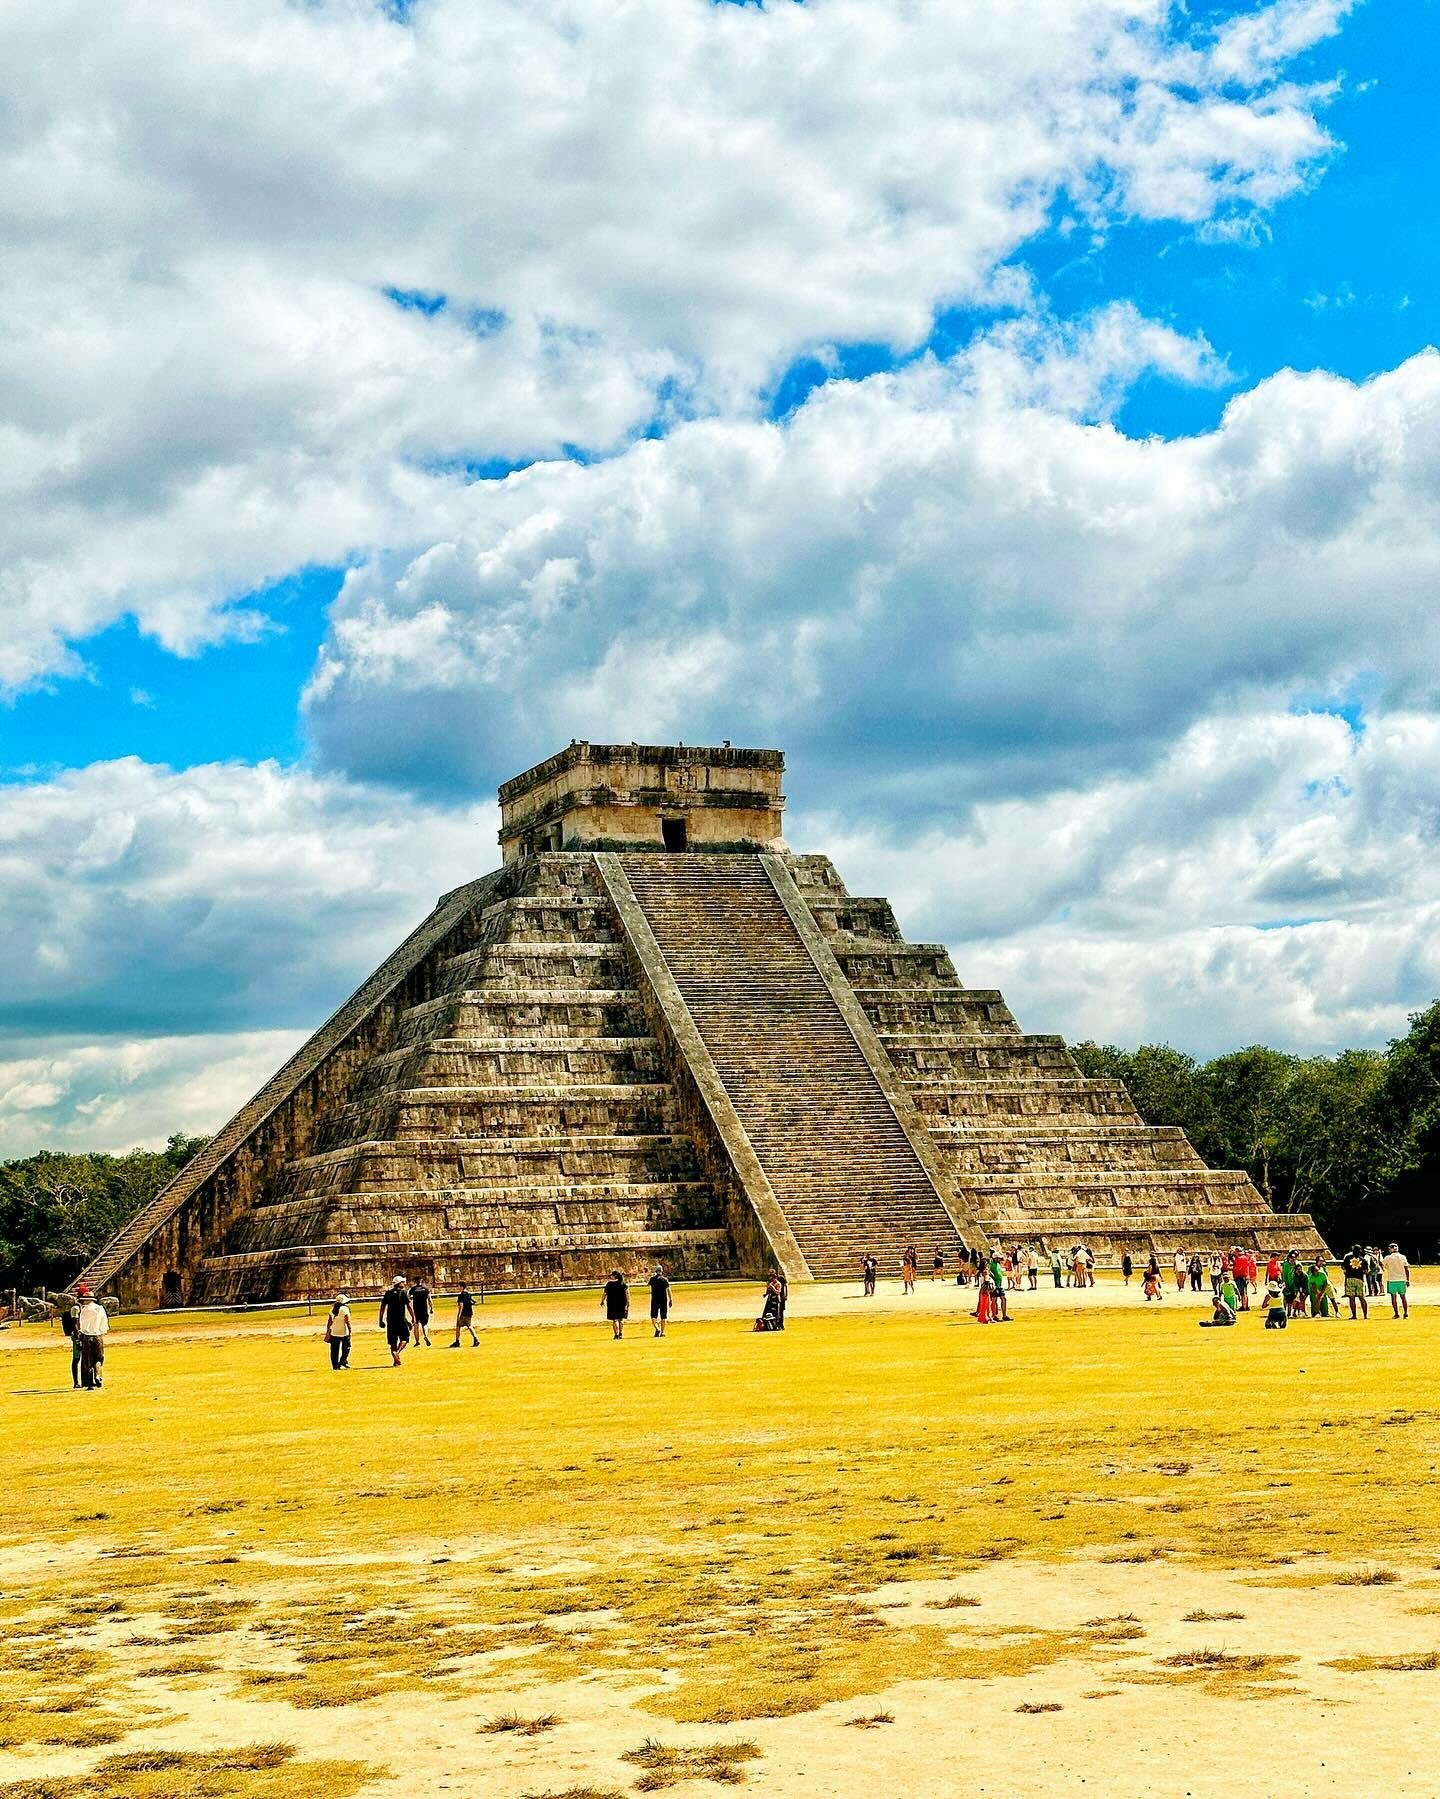 Do you feel the magnetic energy of this place even from the photos? 

The Mayan ruins in Mexico not only highlight their deep spiritual and astronomical beliefs, reflected in the precise alignment of their buildings with celestial events.

And on a slightly different topic — I often reflect (and also discuss with coaching clients) how much our internal perception influences our external perception. 

That’s why two people see the same site differently or even take a photograph of it differently. Our mood and self-talk tend to influence our focus, guiding us to see and interpret our environment through the lens of our current emotions and beliefs.

To shift what we see on the outside, we must first transform our inner dynamic. Our view of the world is not just what we see, but HOW we choose to see it. 

#mayanruins #chichenitza #chichenitzamexico #yacatan #mayancalendar #mexico🇲🇽 #mindsetcoaching #nlpcoaching